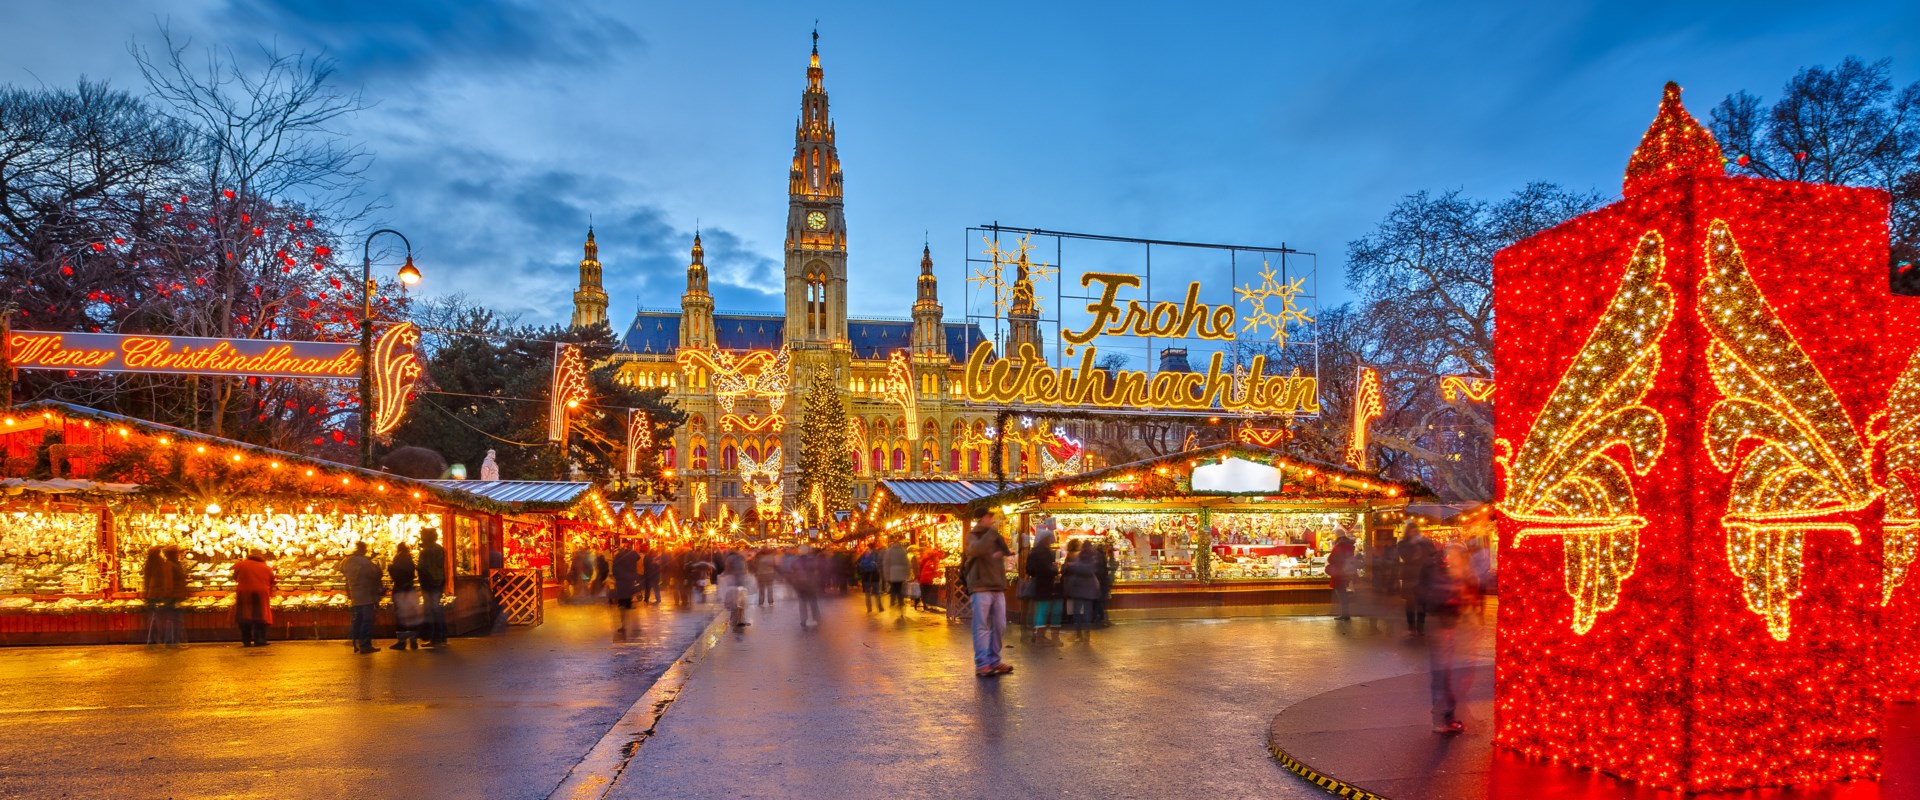 See the best of Europe s Holiday Markets